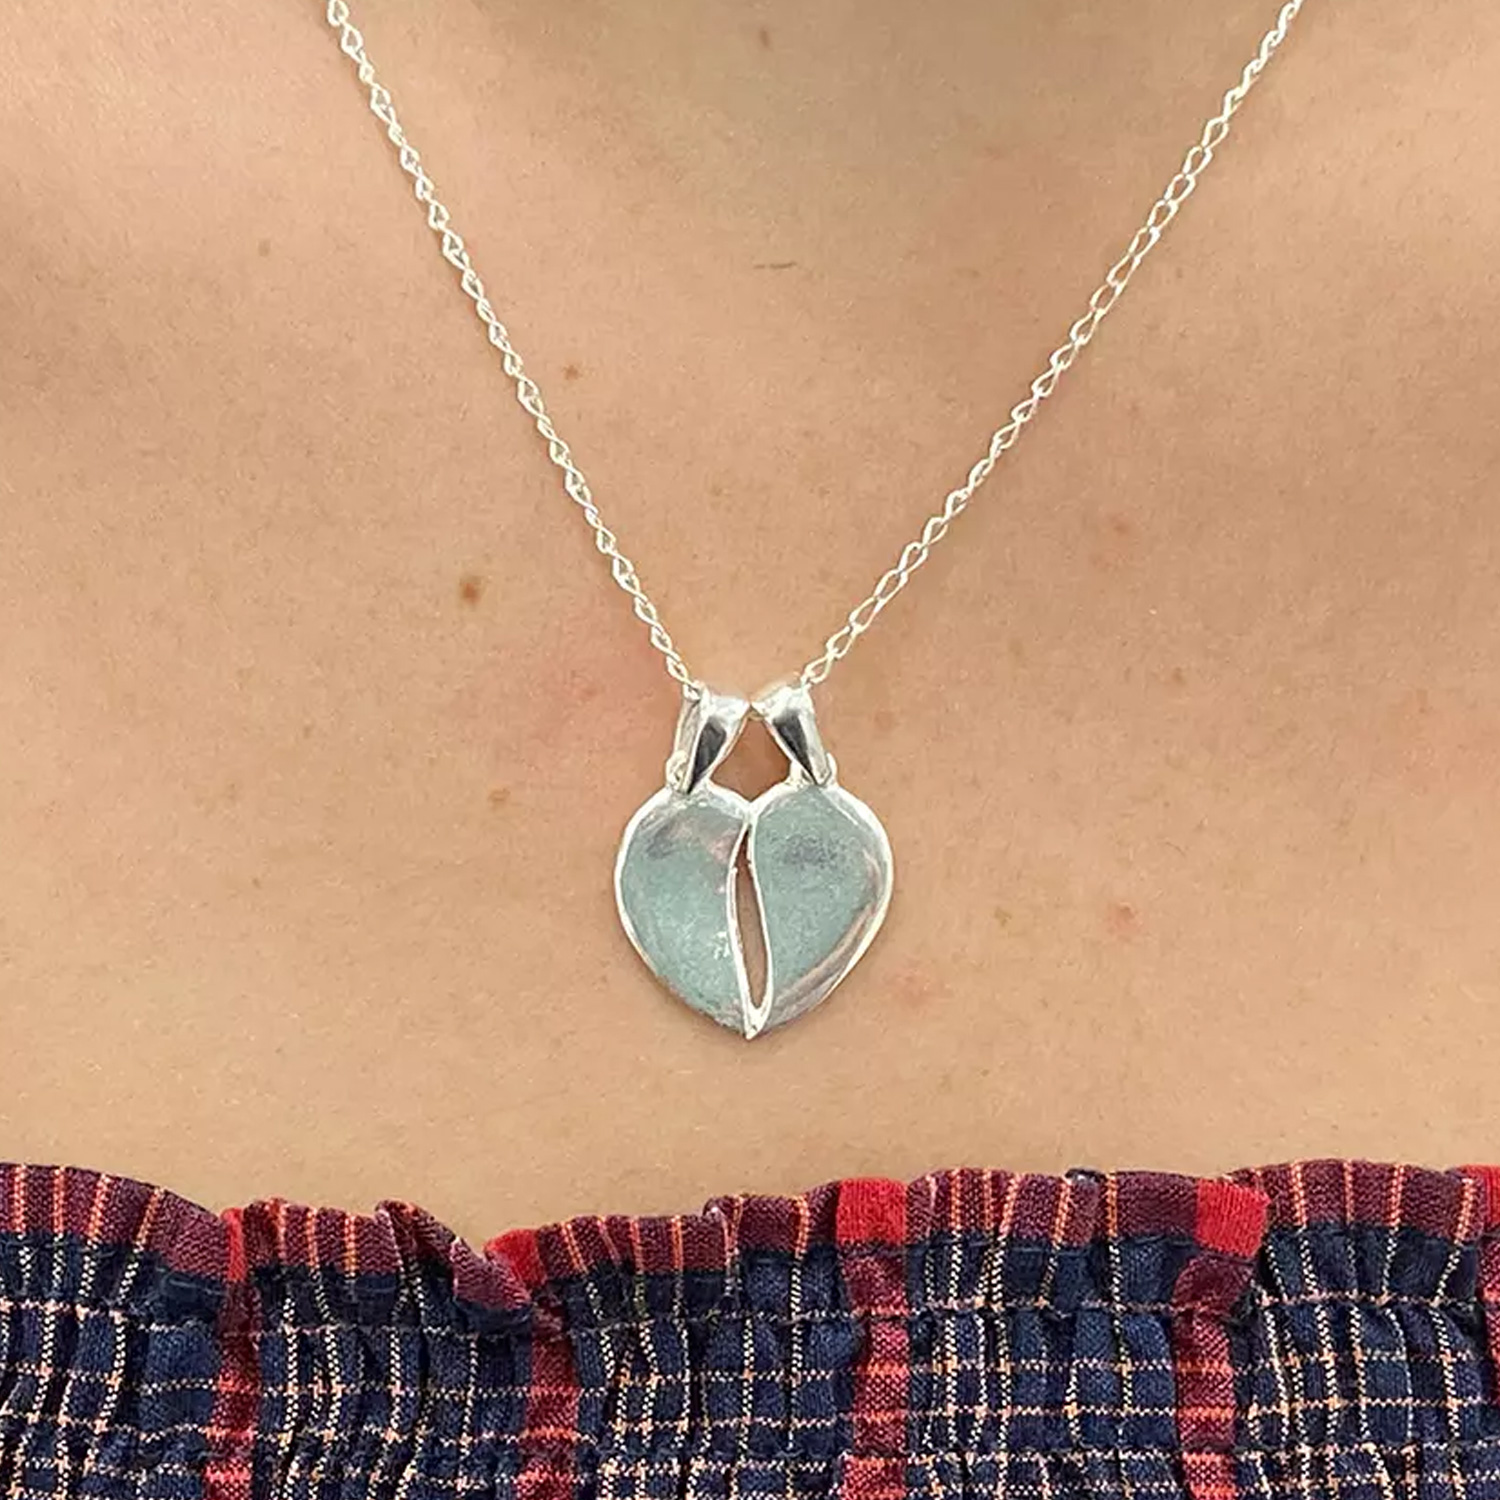 2-Piece Heart Sterling Silver Necklace